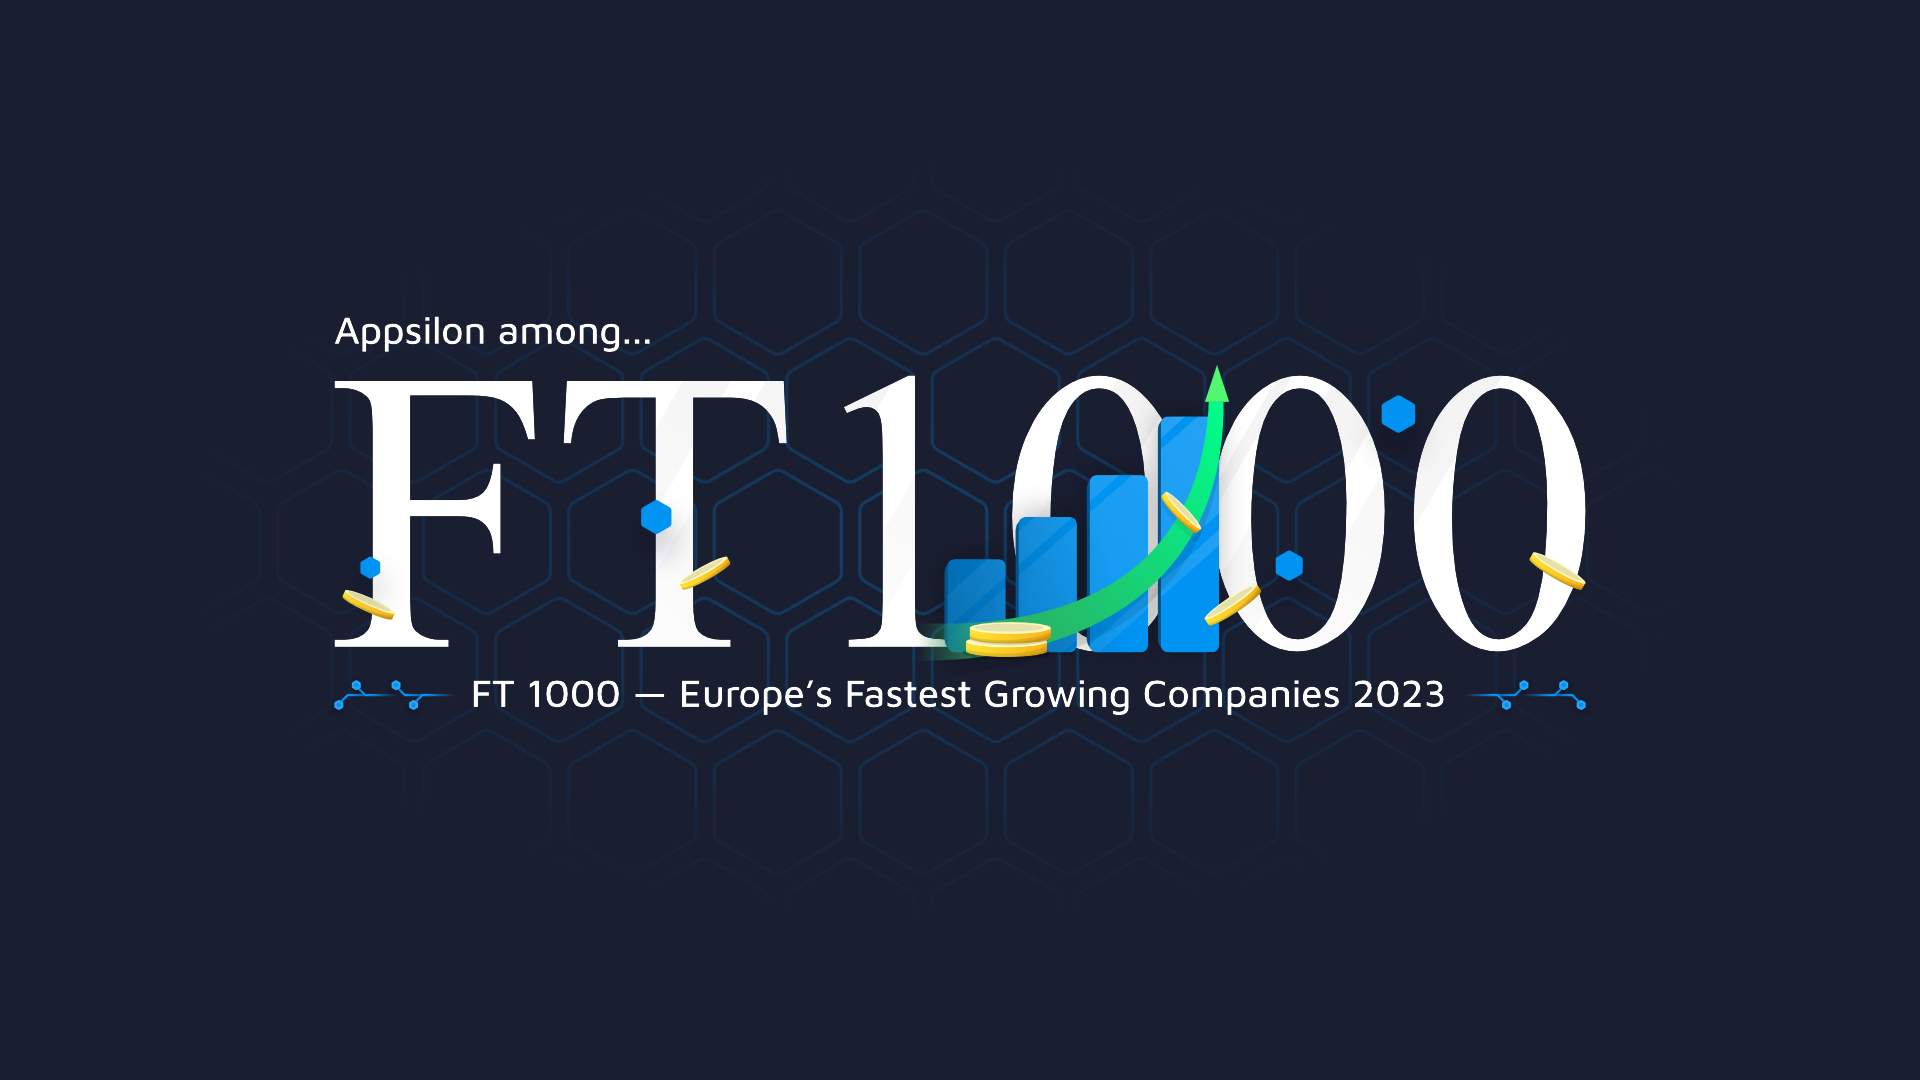 Appsilon FInancial Times 1000 Fastest Growing Companies 2023